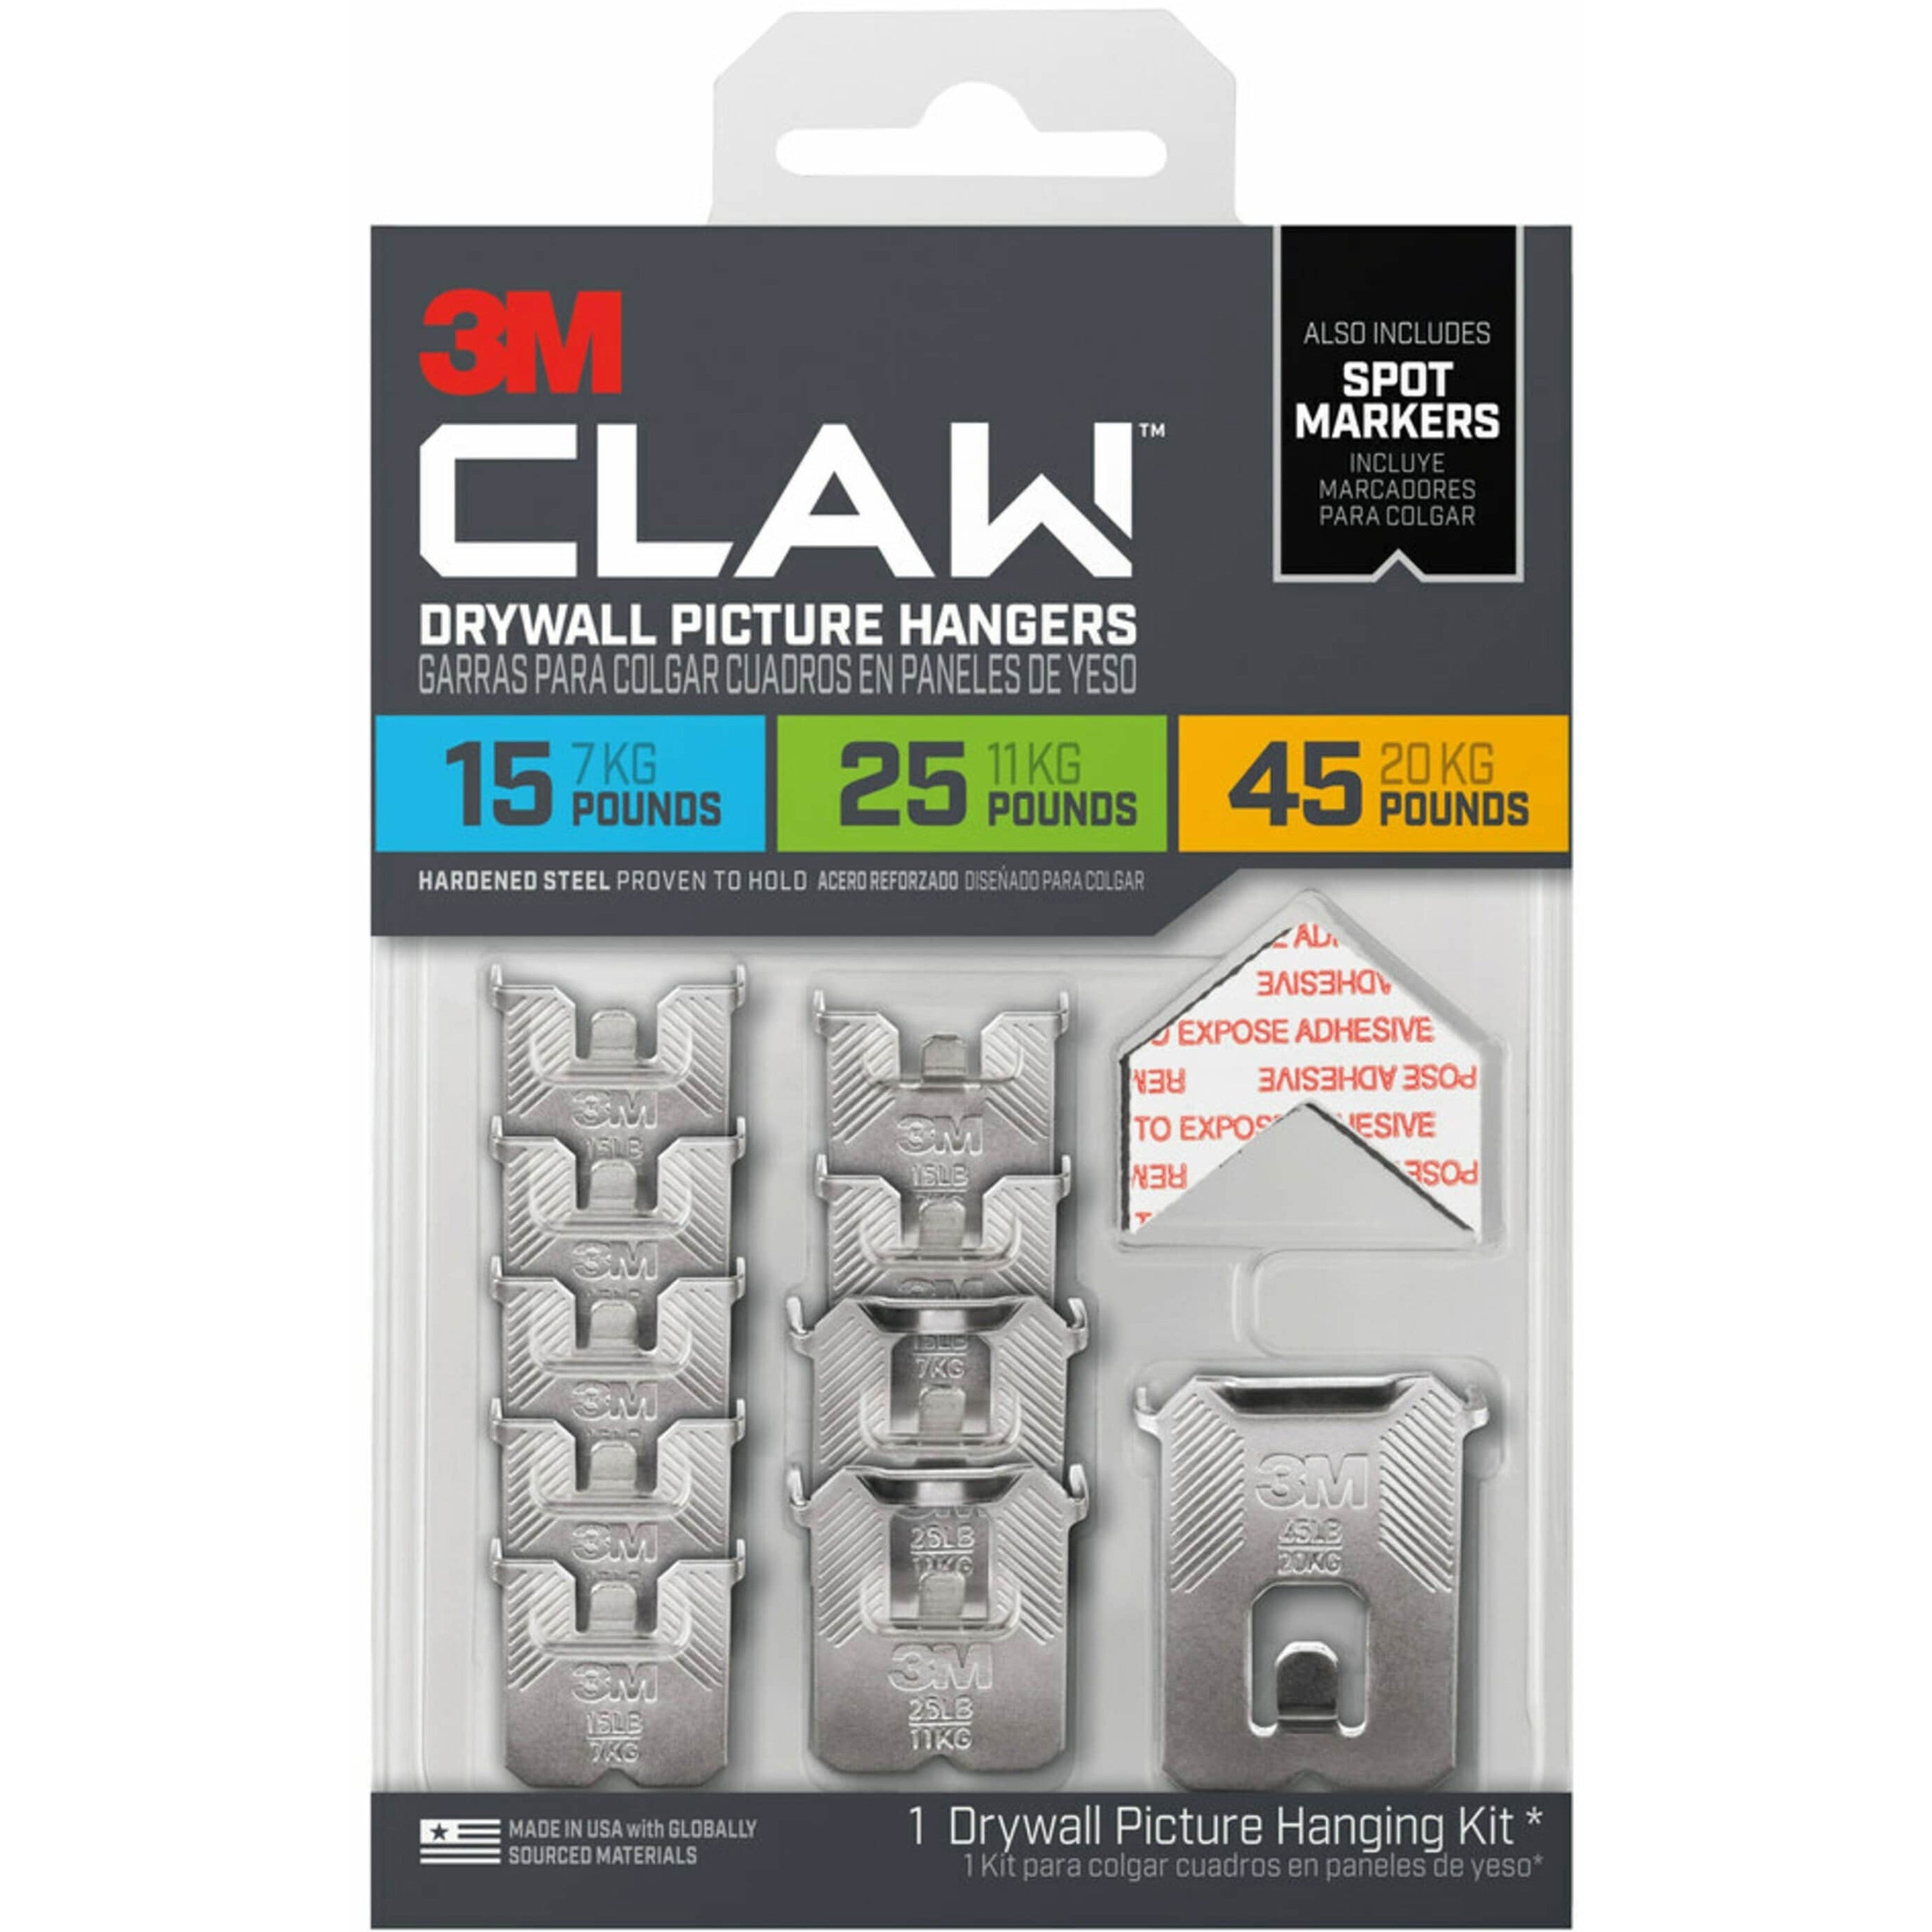 3m-claw-drywall-picture-hanger-45-lb-2041-kg-25-lb-1134-kg-15-lb-680-kg-capacity-2-length-for-pictures-project-mirror-frame-home-decoration-steel-gray-10-pack_mmm3phkitm10es - 1